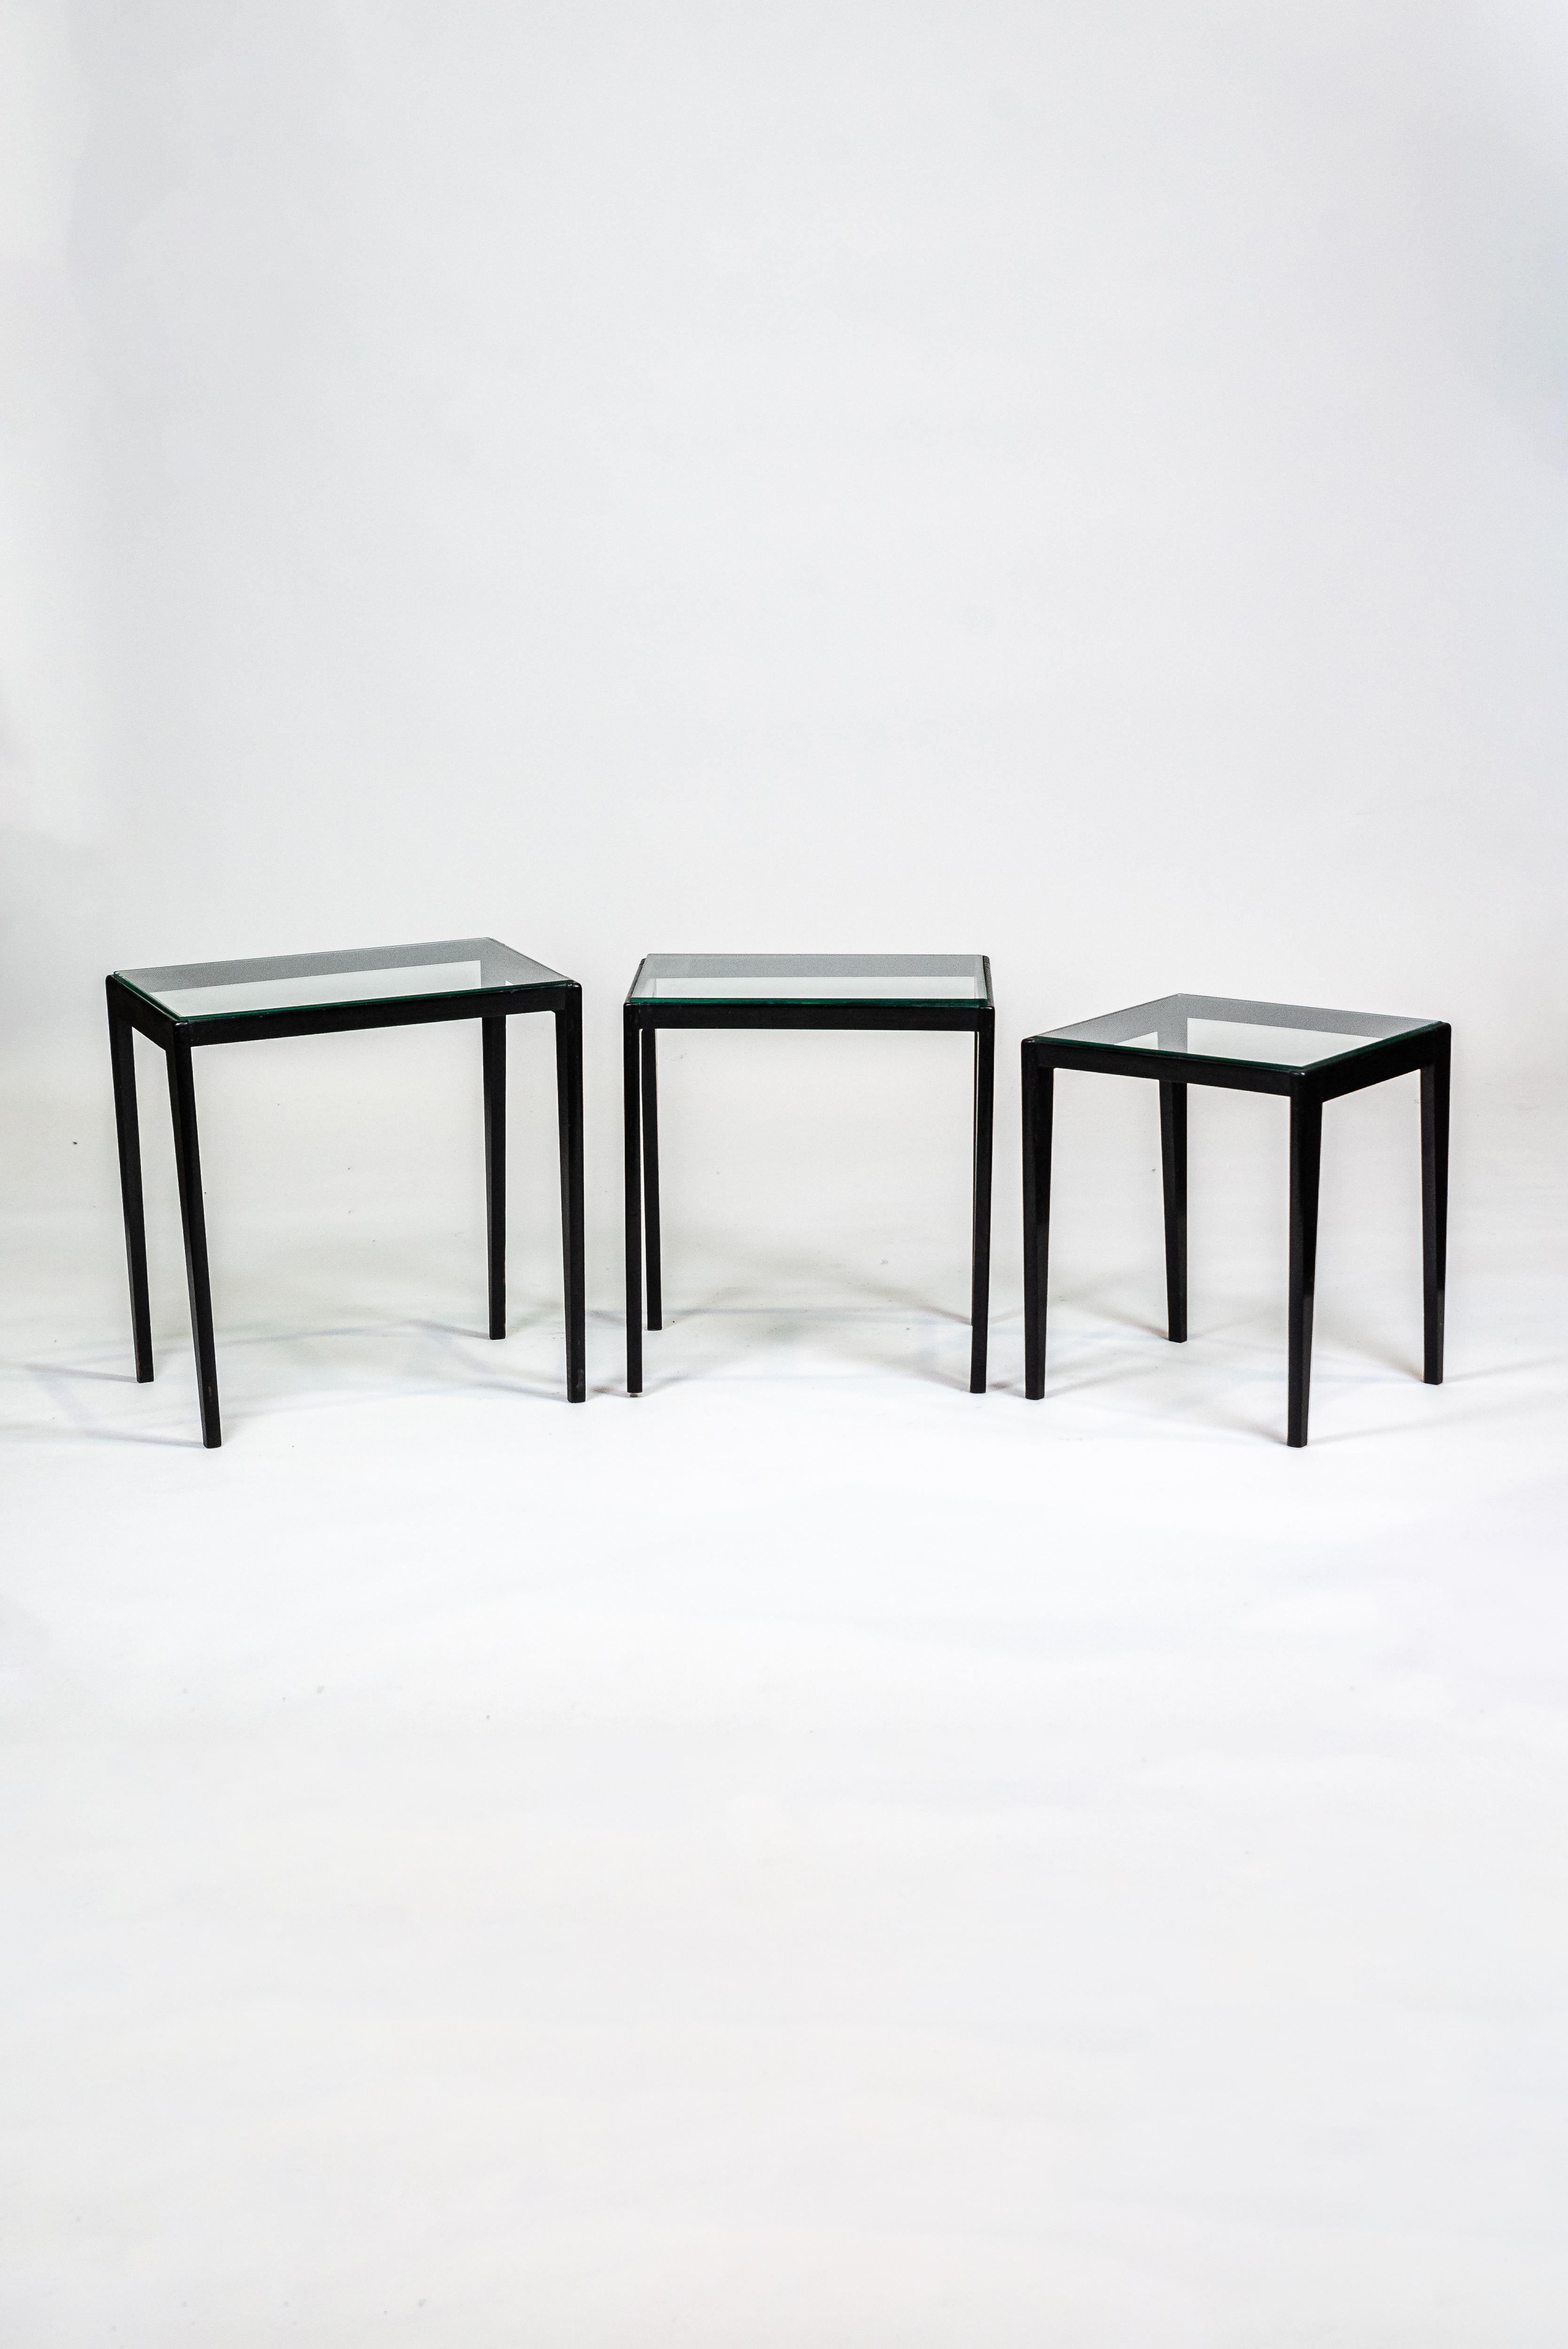 As usual, Scapinelli distinguishes himself with these nesting tables 